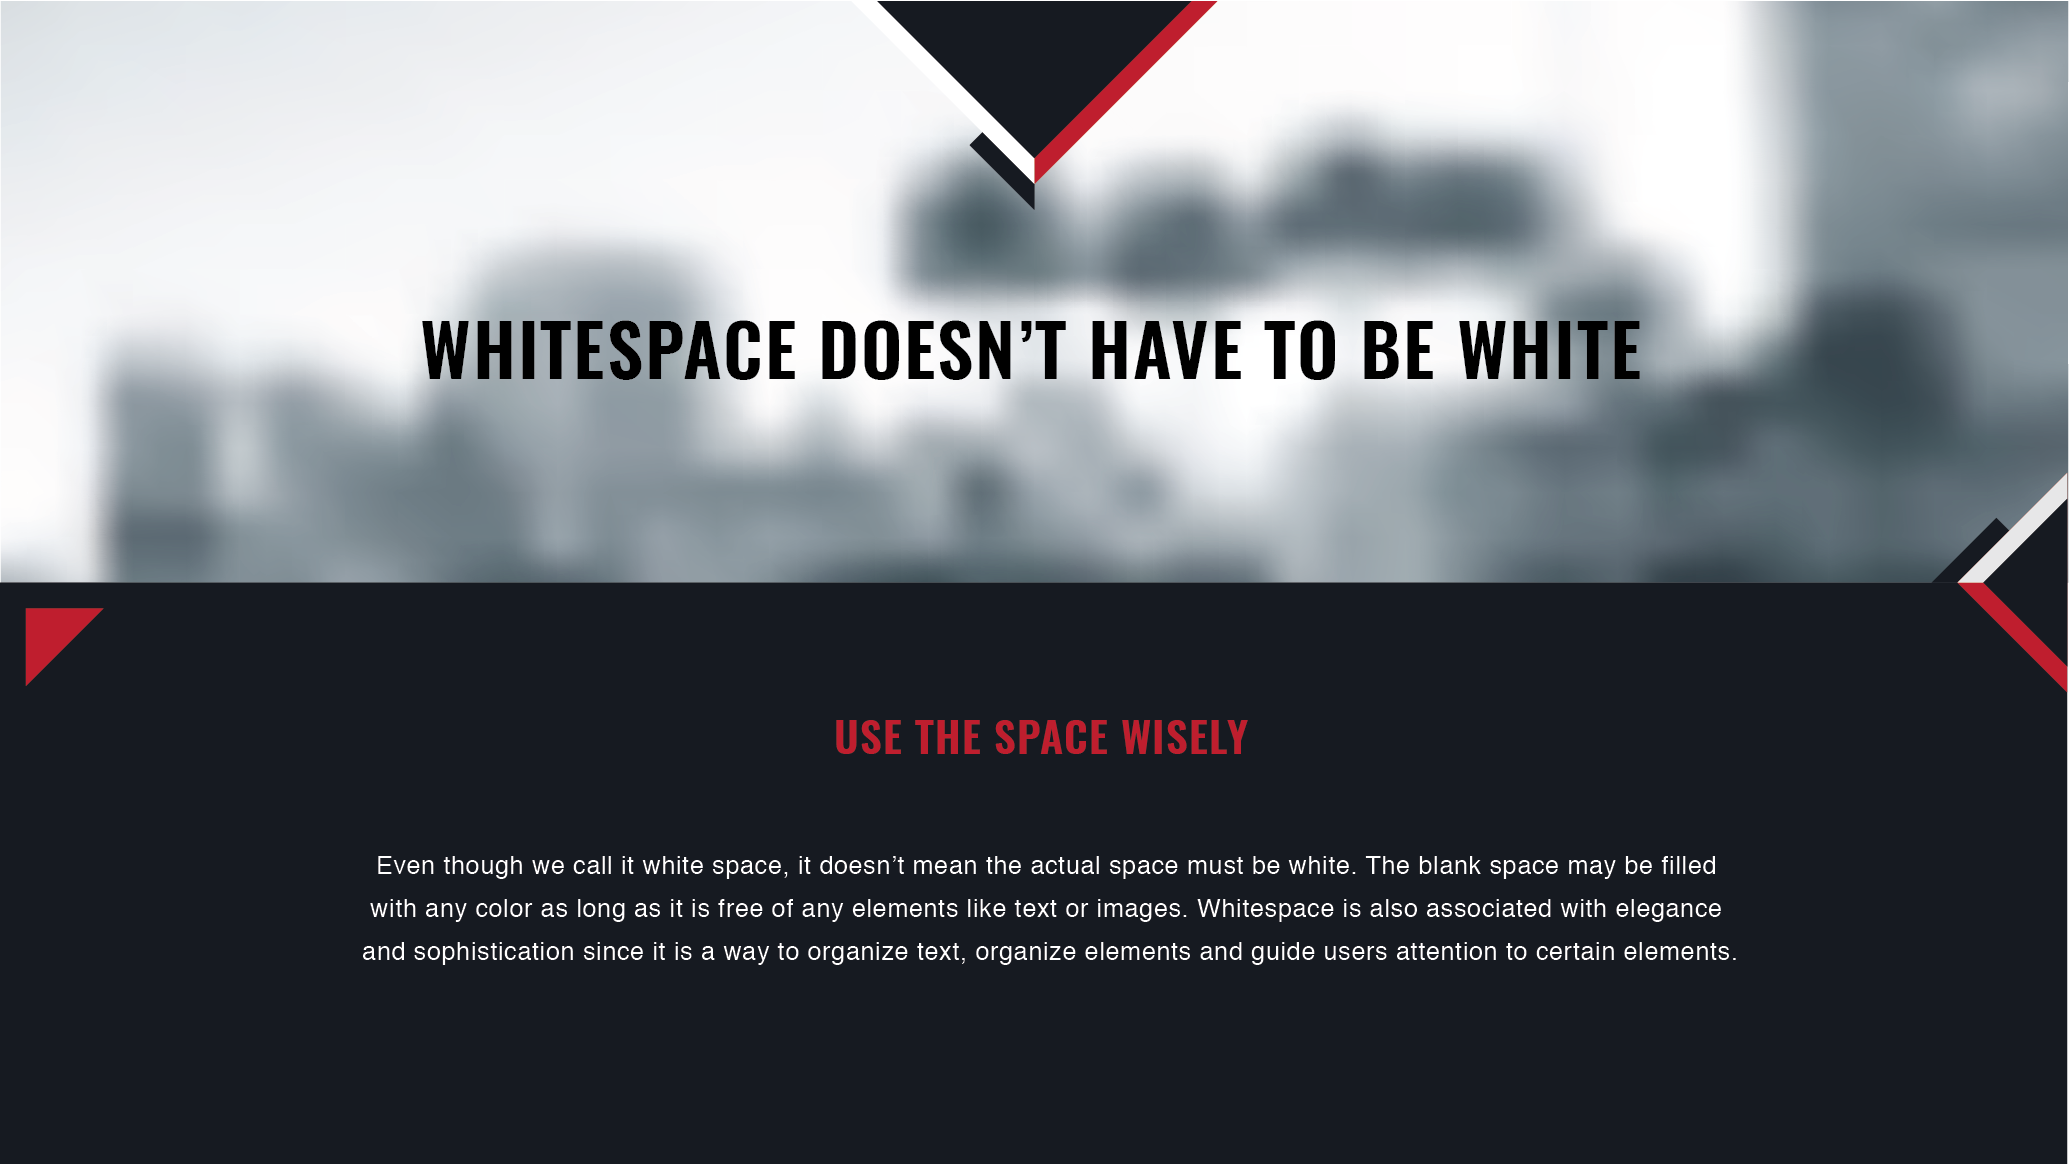 Whitespace does not have to be white.